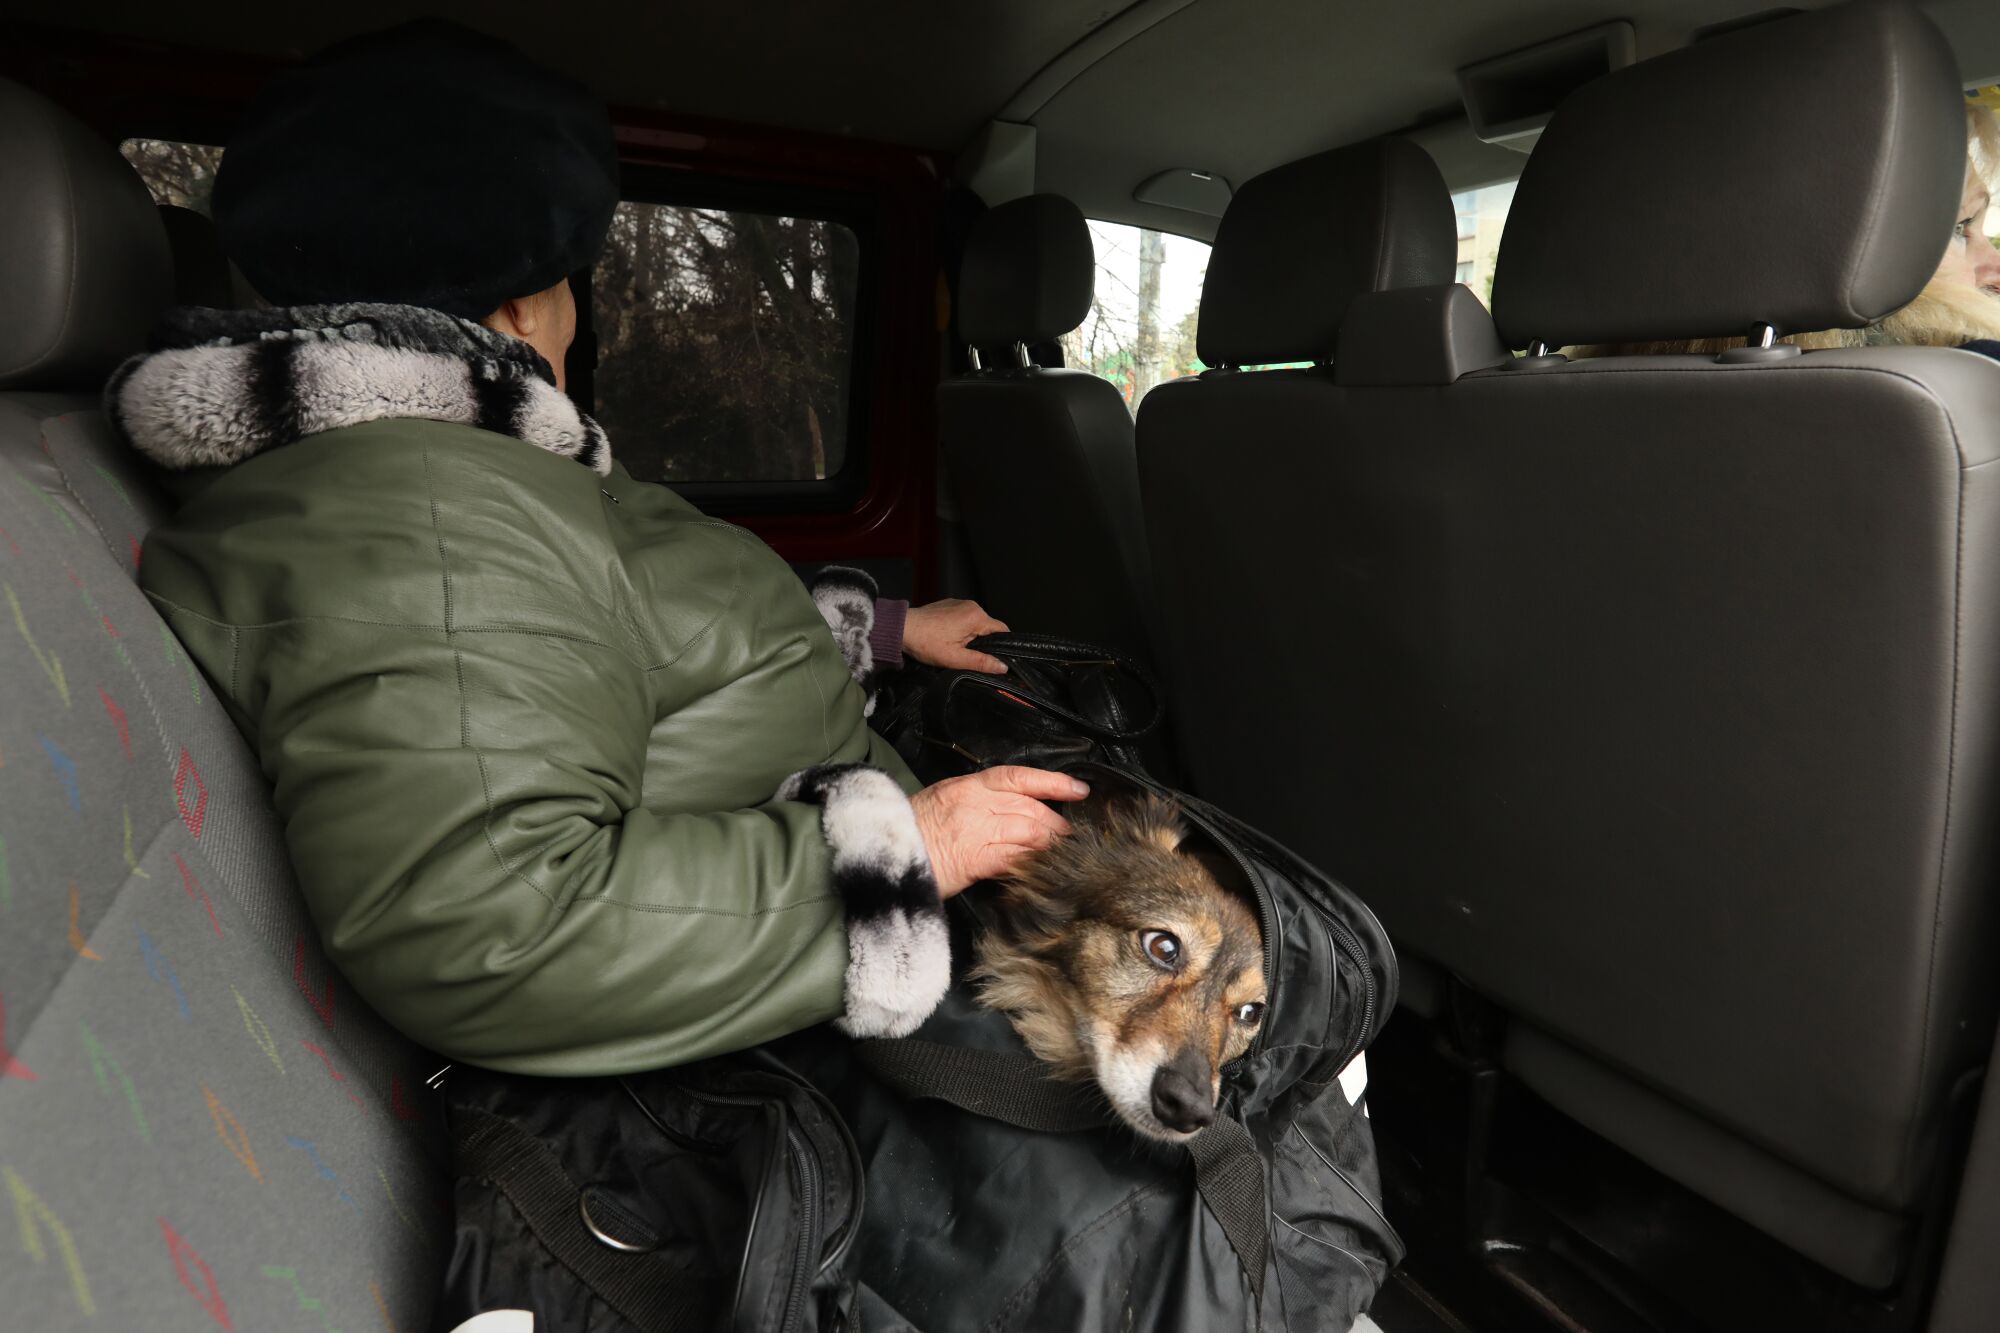 A woman leaves Slavyansk with her dog in a duffle bag.